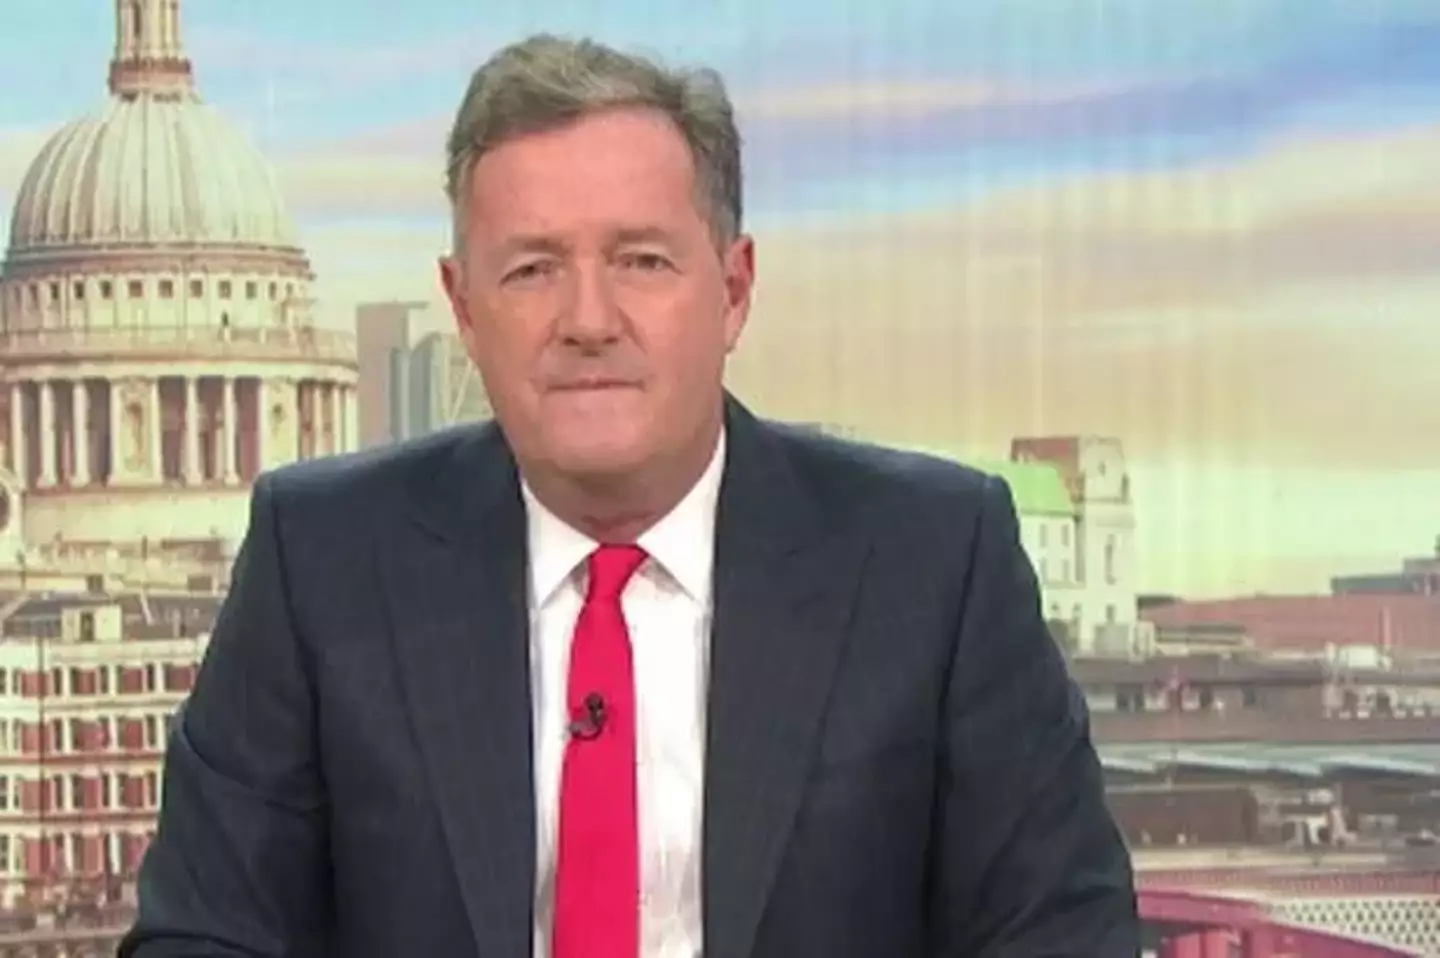 Piers Morgan claimed that Katy Perry told him her nickname for Russell Brand was 'Rasputin'.